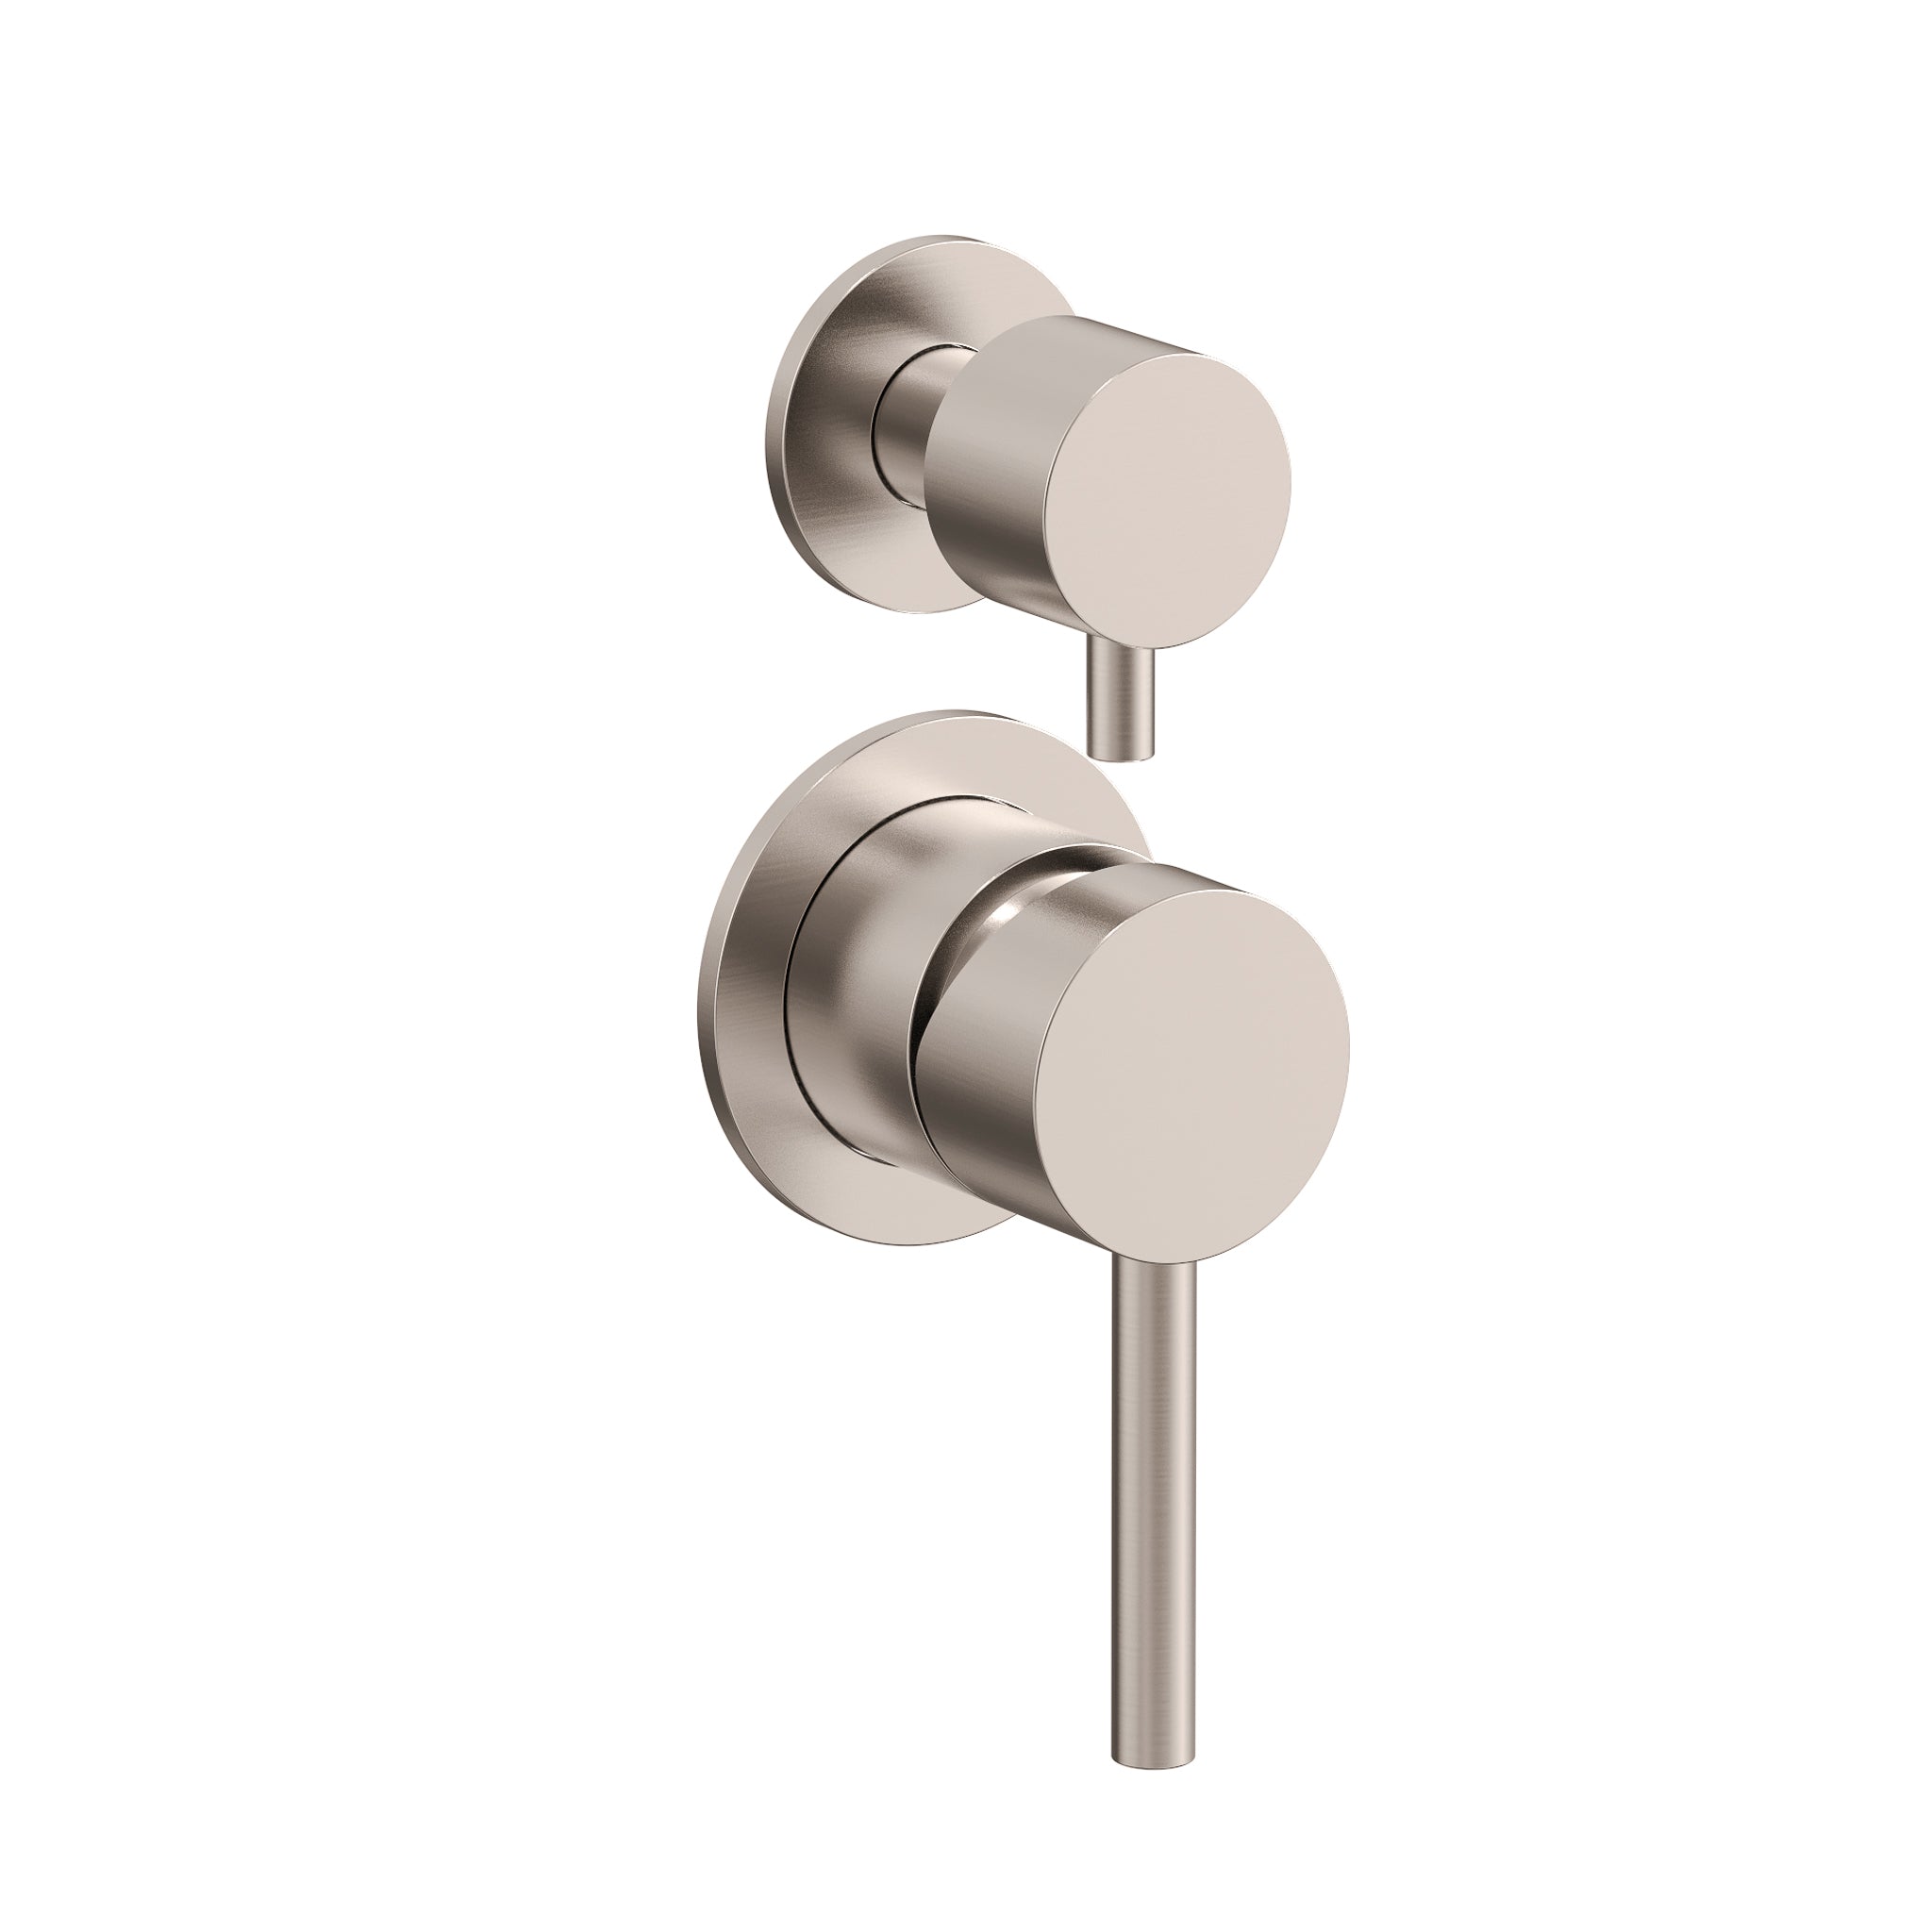 Profile III Shower/ Bath Wall Mixer with Diverter, Brushed SS Nickel